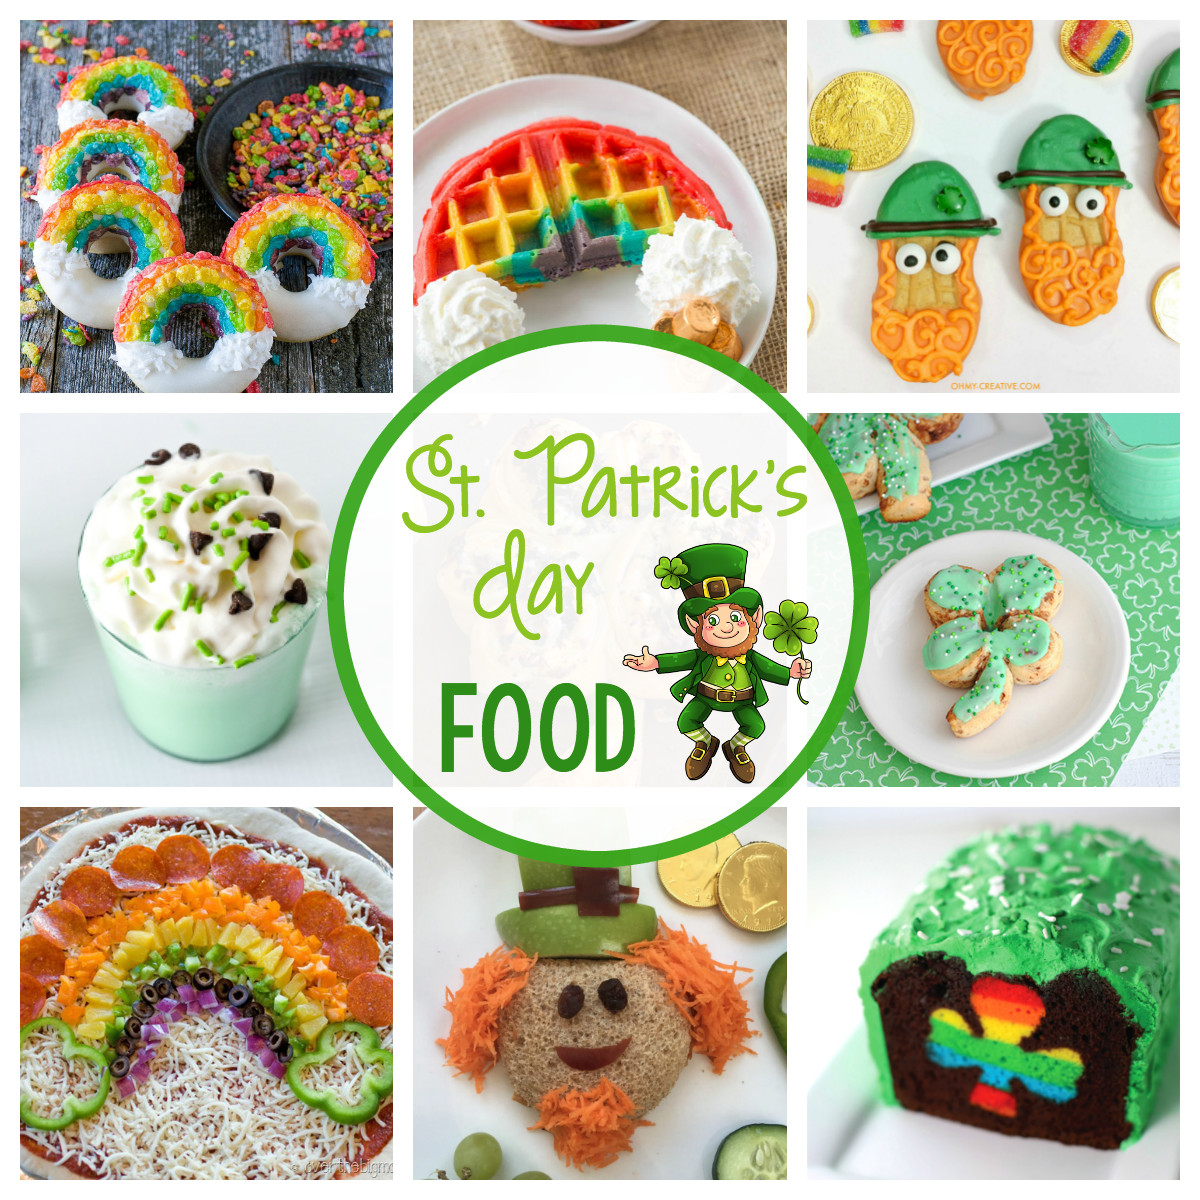 St Patrick's Day Breakfast Ideas
 17 St Patrick s Day Food Ideas for Kids – Fun Squared